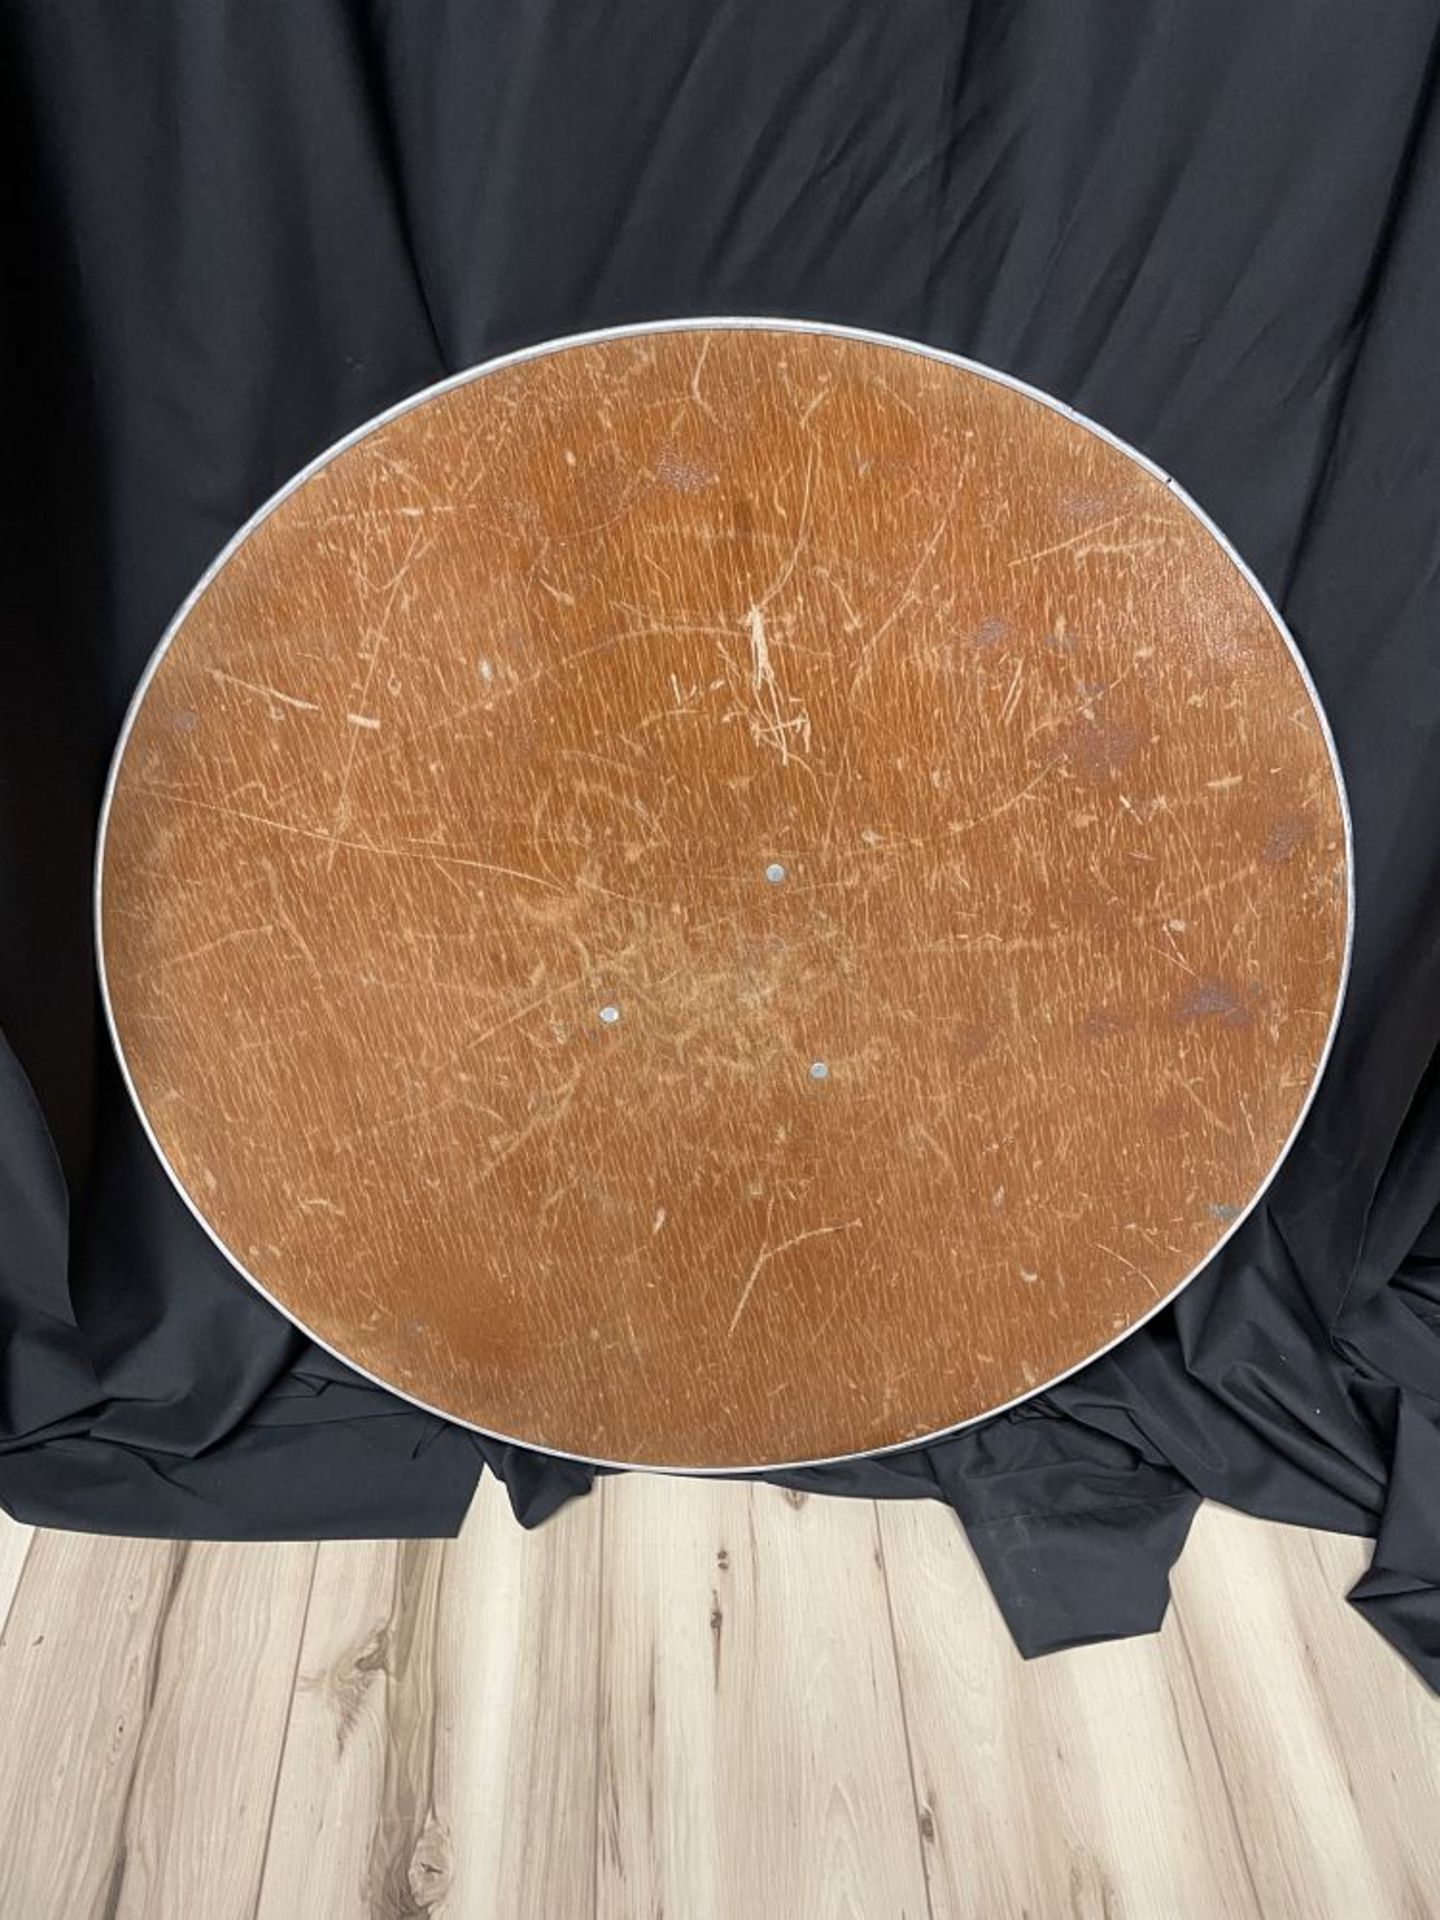 PALMER SNYDER COCKTAIL TABLE TOP, 3 FT. ROUND, WOOD